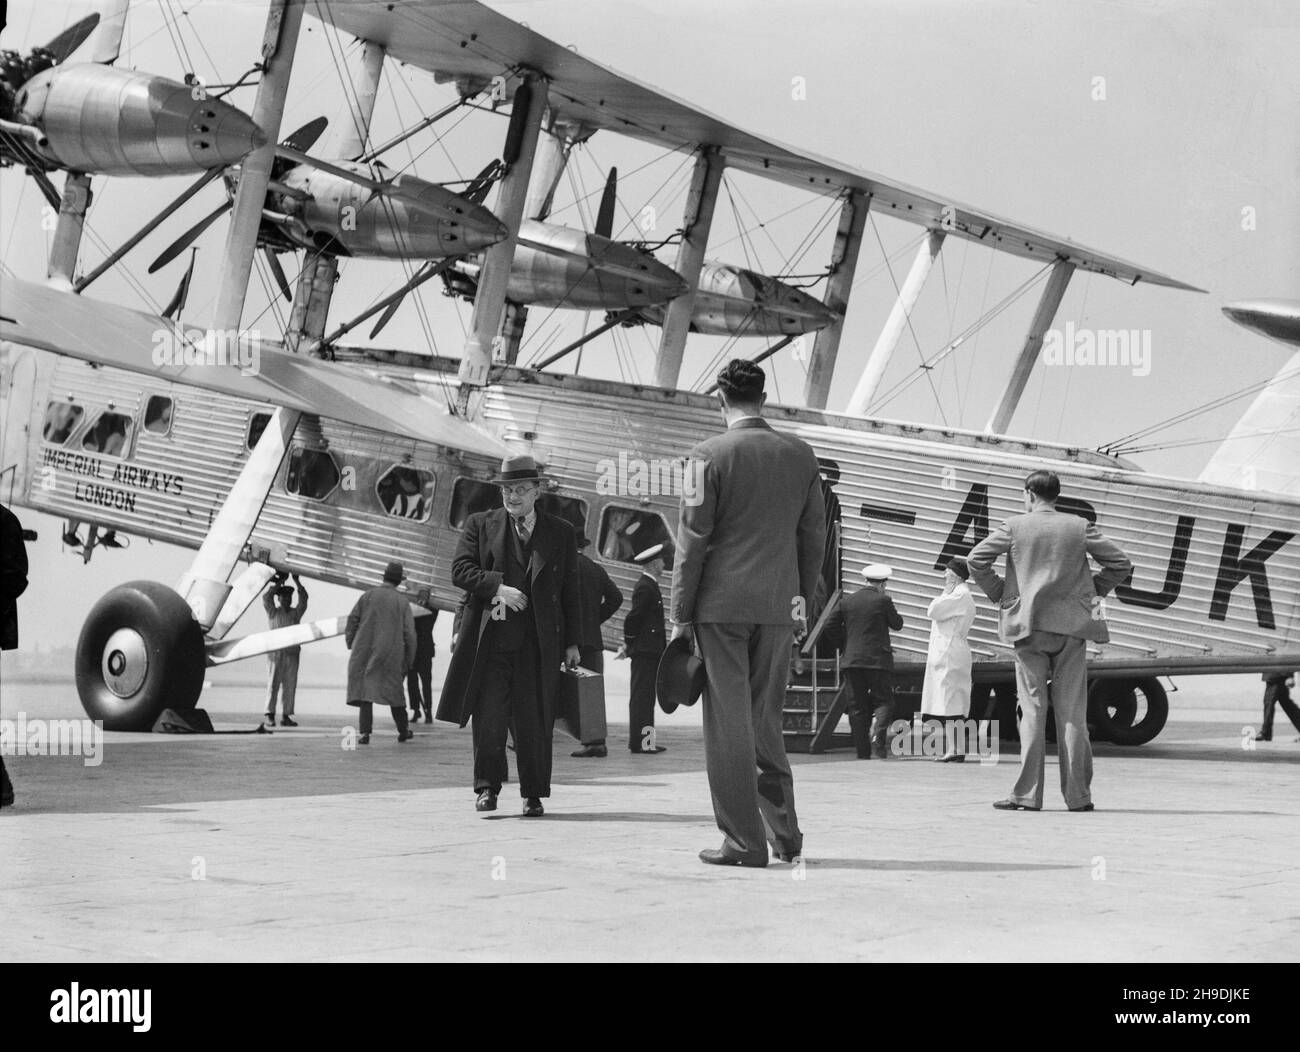 A vintage black and white photograph taken in 1938, showing a Short L.17 Syrinx, serial number G-ACJK, of Imperial Airways at Croydon Aerodrome, outside London. Image showing passengers disembarking from the aircraft. Stock Photo